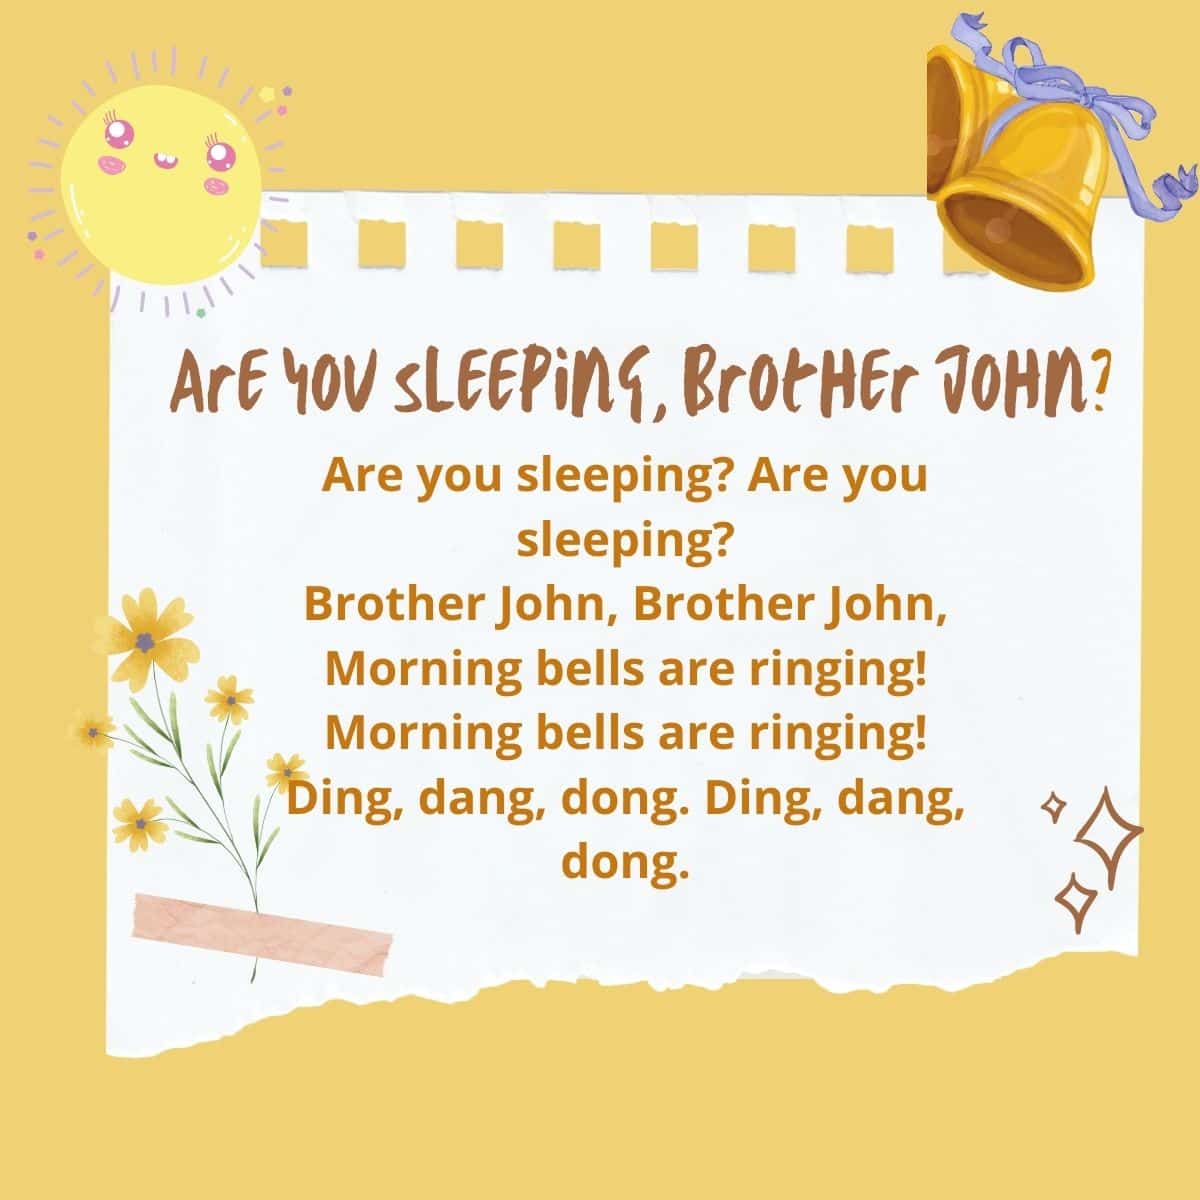 Are You Sleeping, Brother John? Lyrics on light yellow background with sun and bells